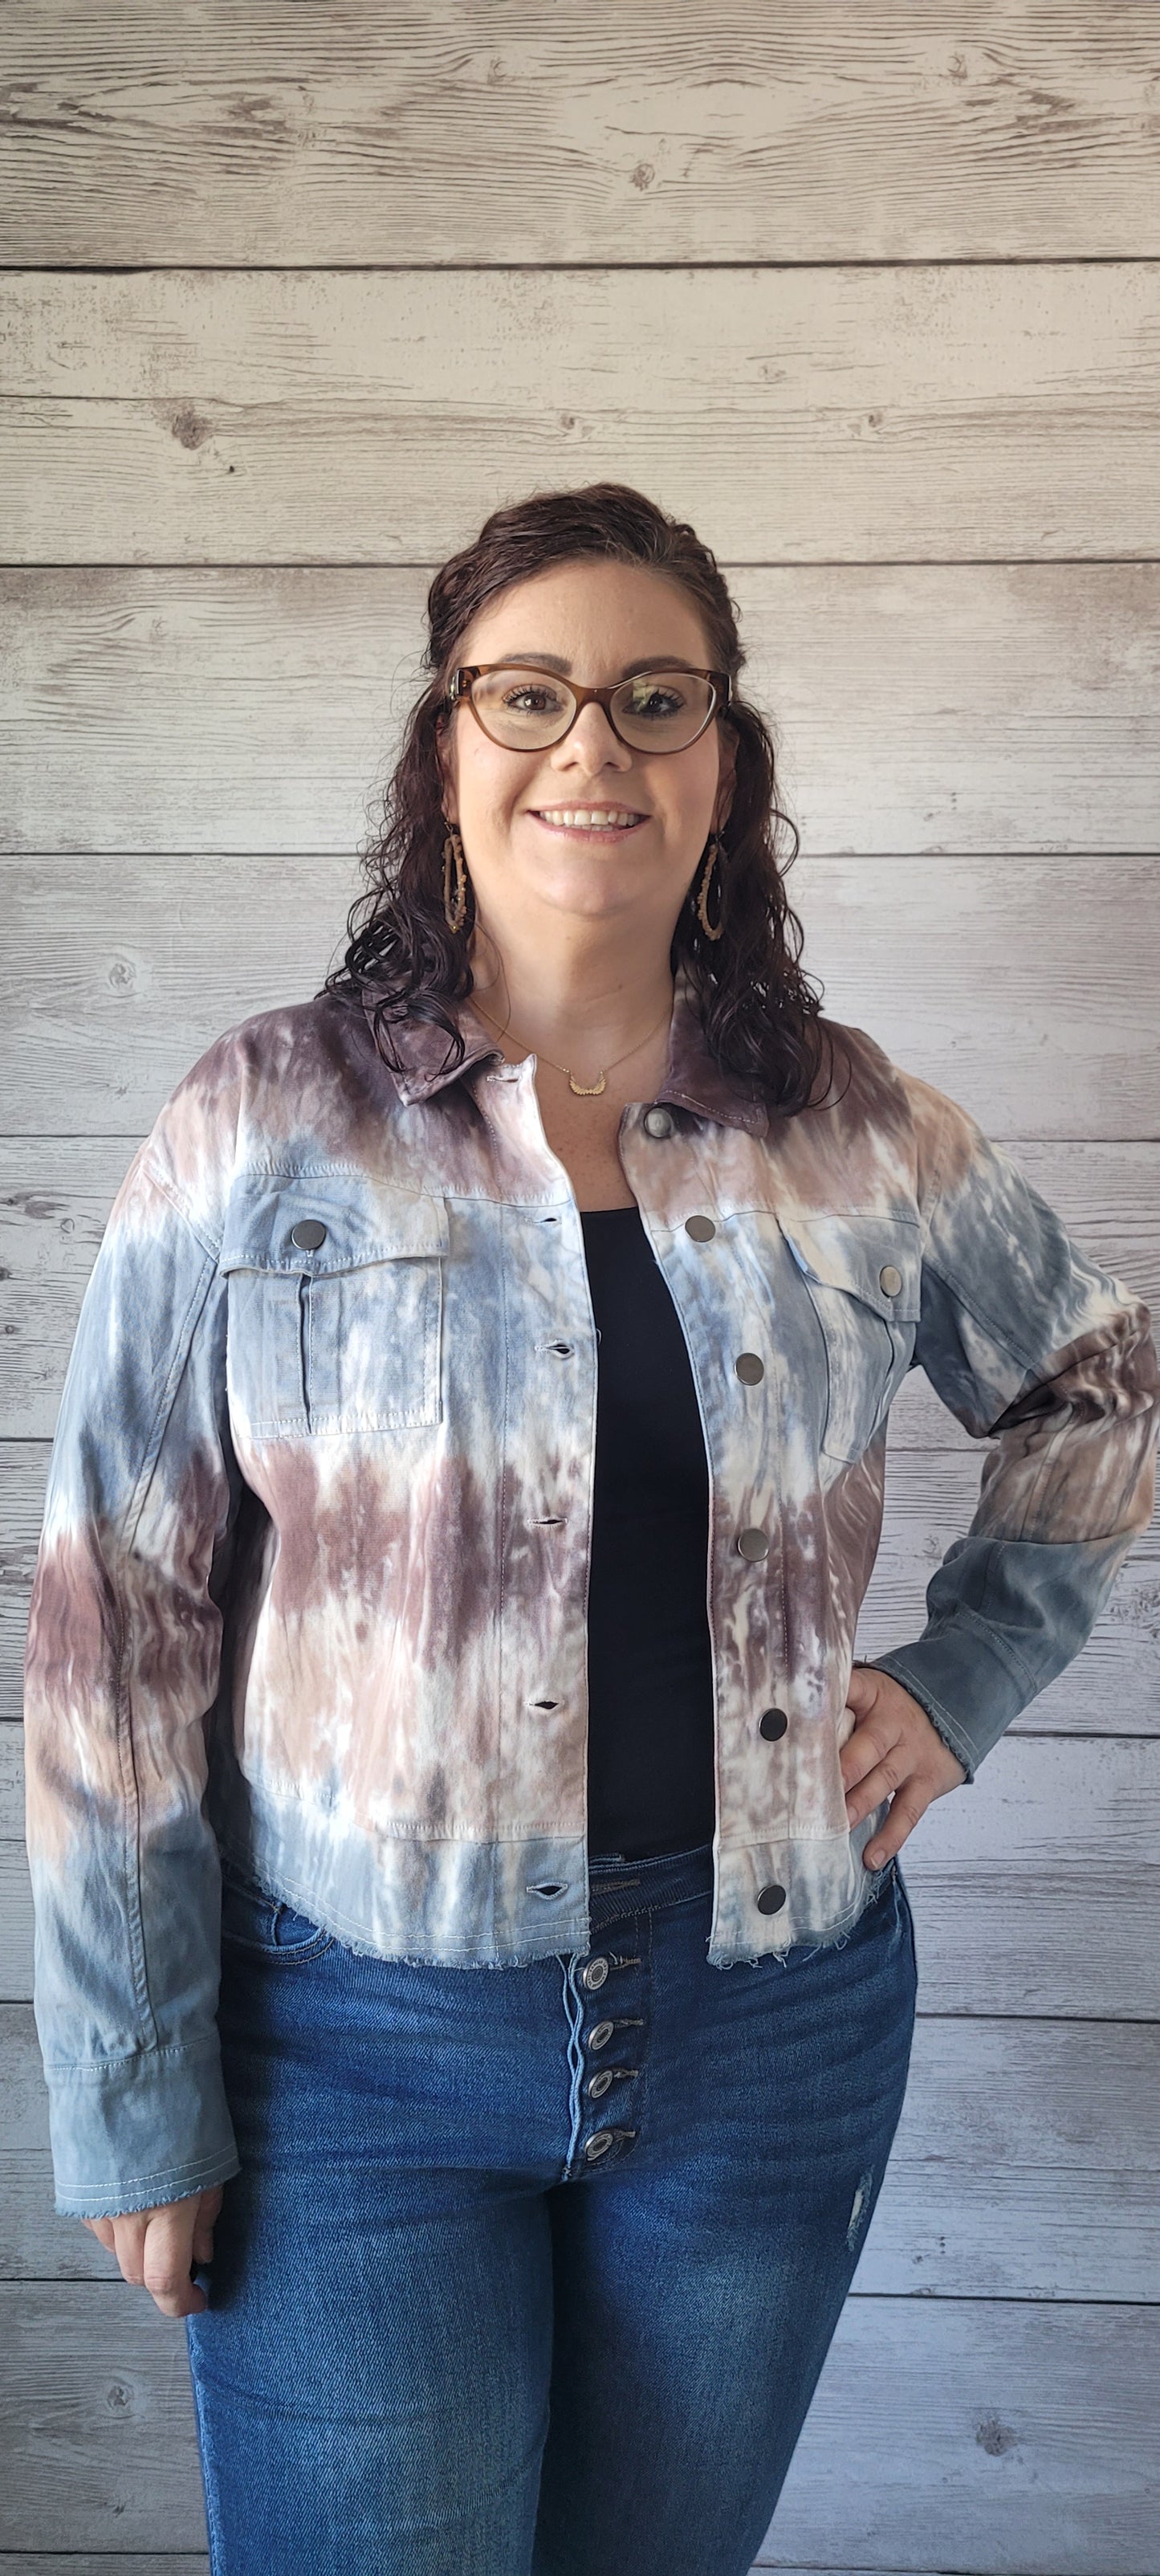 Make a statement with this adorable blue & brown tie dye trucker jacket! Enjoy the unique style of this timeless piece featuring metal button closure, bust flap pockets, and distressed hem and cuff edges. Wearing this piece is sure to cause a stir; try it and let the compliments roll in! Sizes small through large.